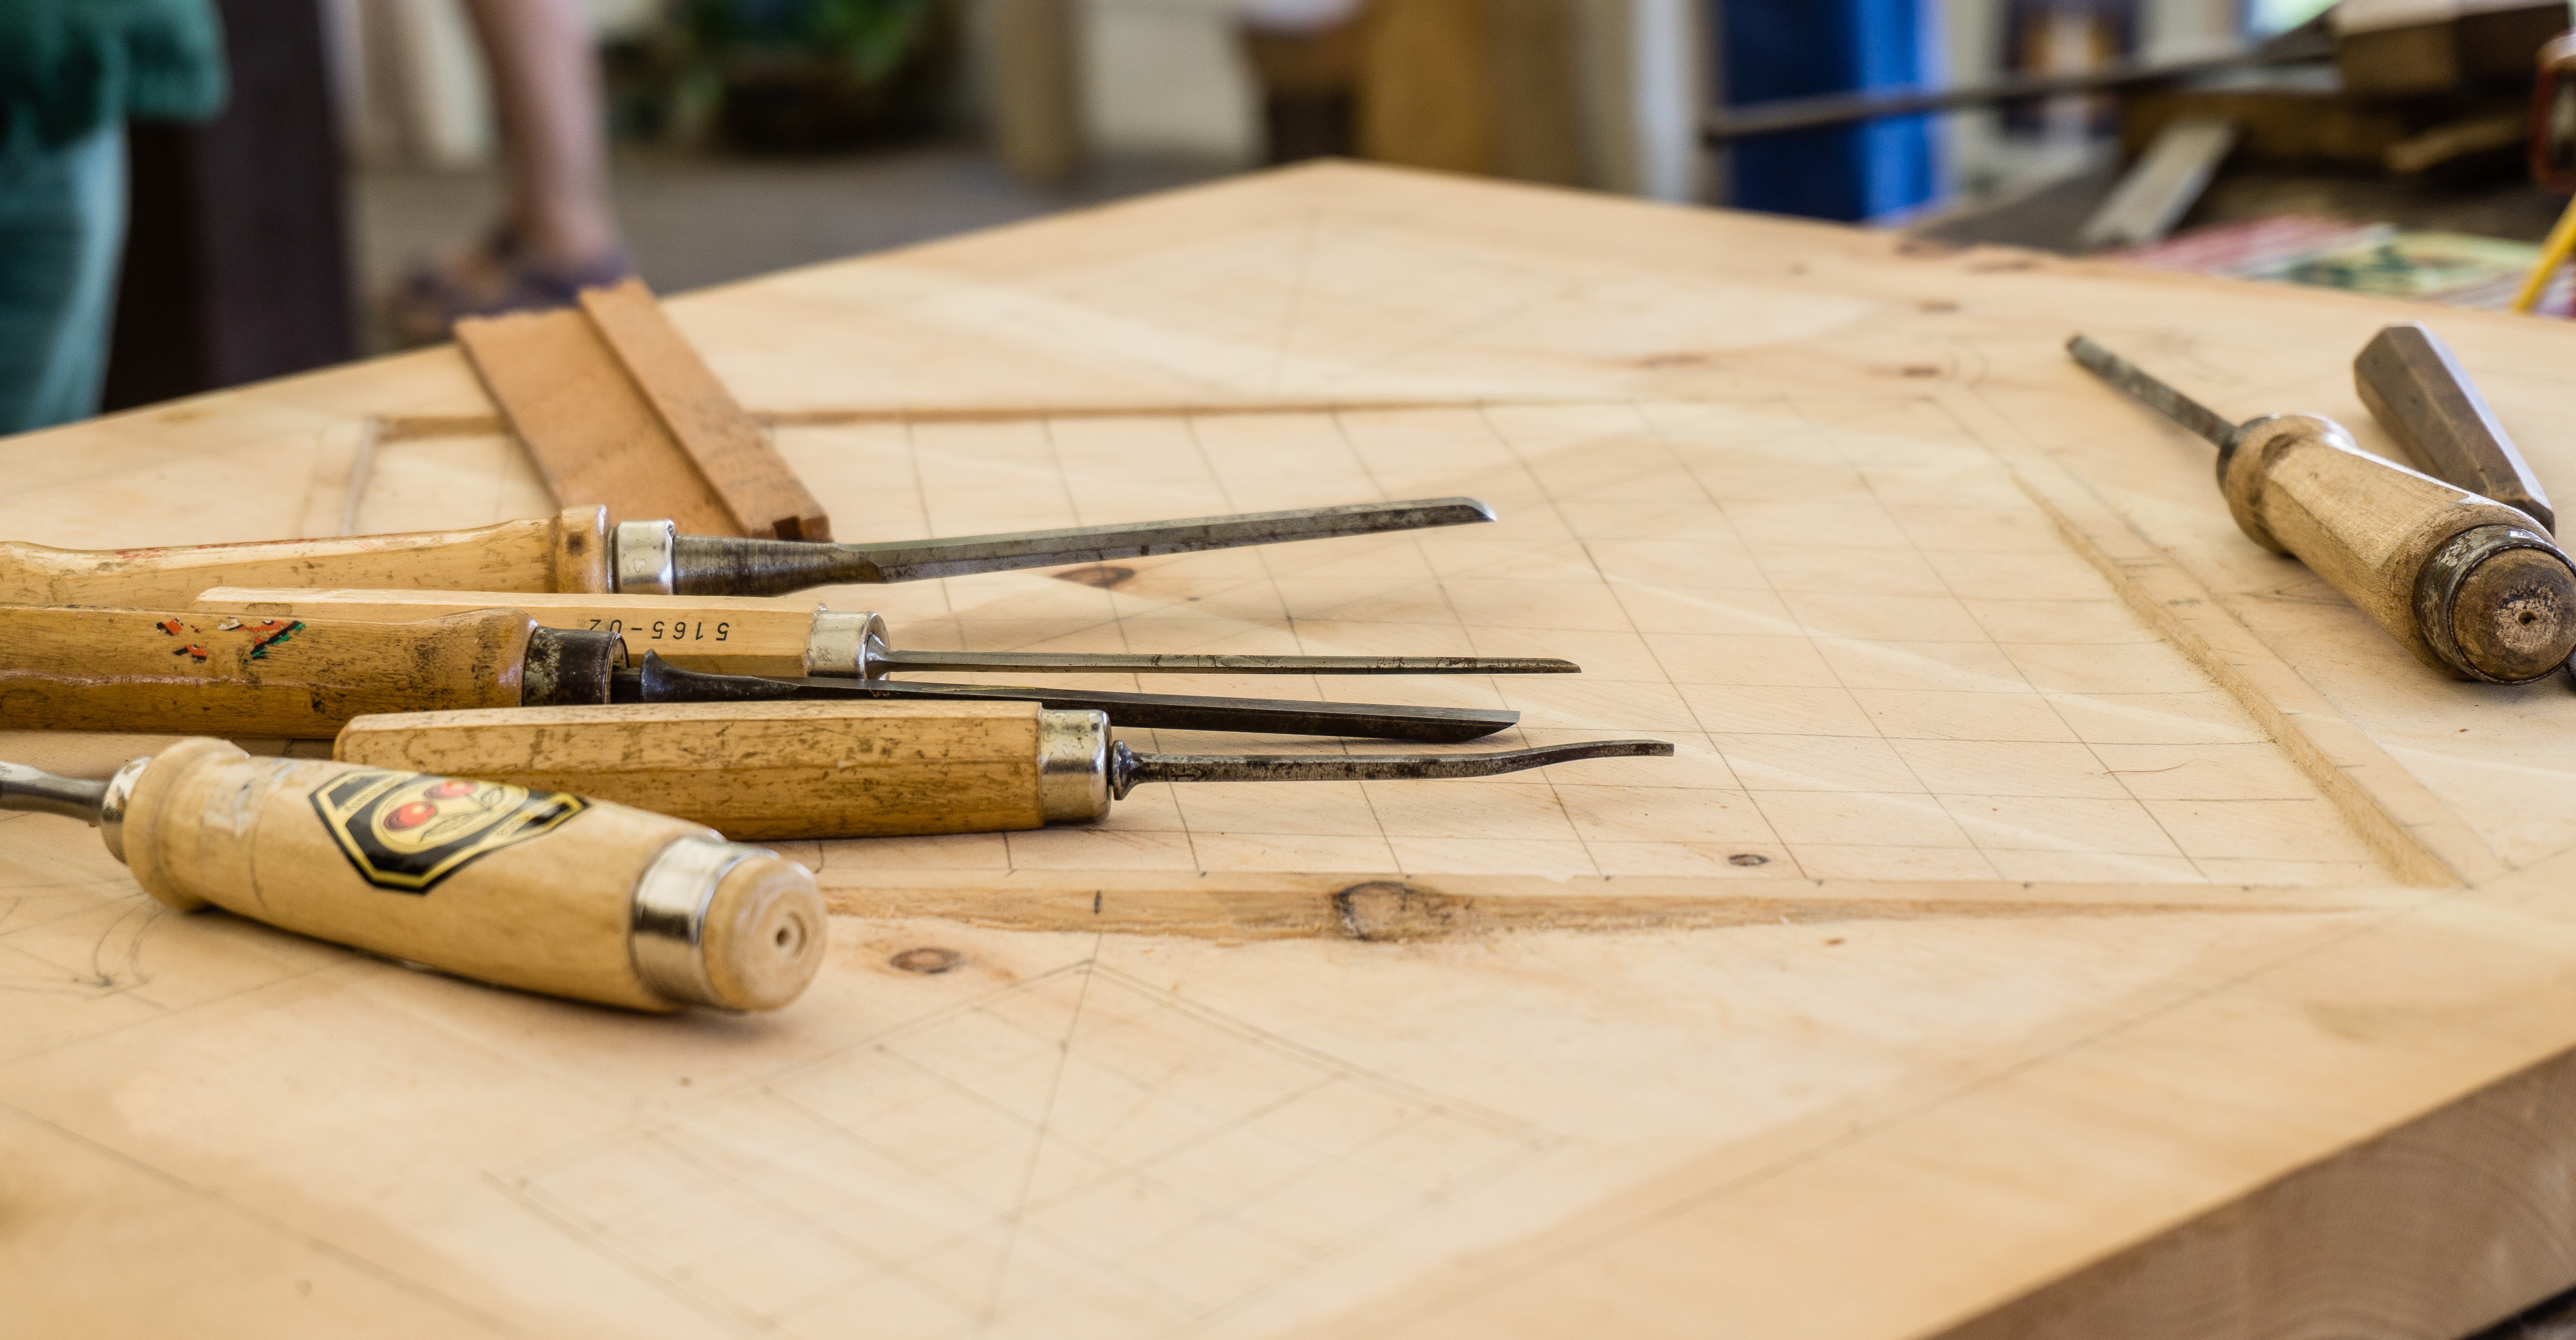 What are the different types of carpentry role?